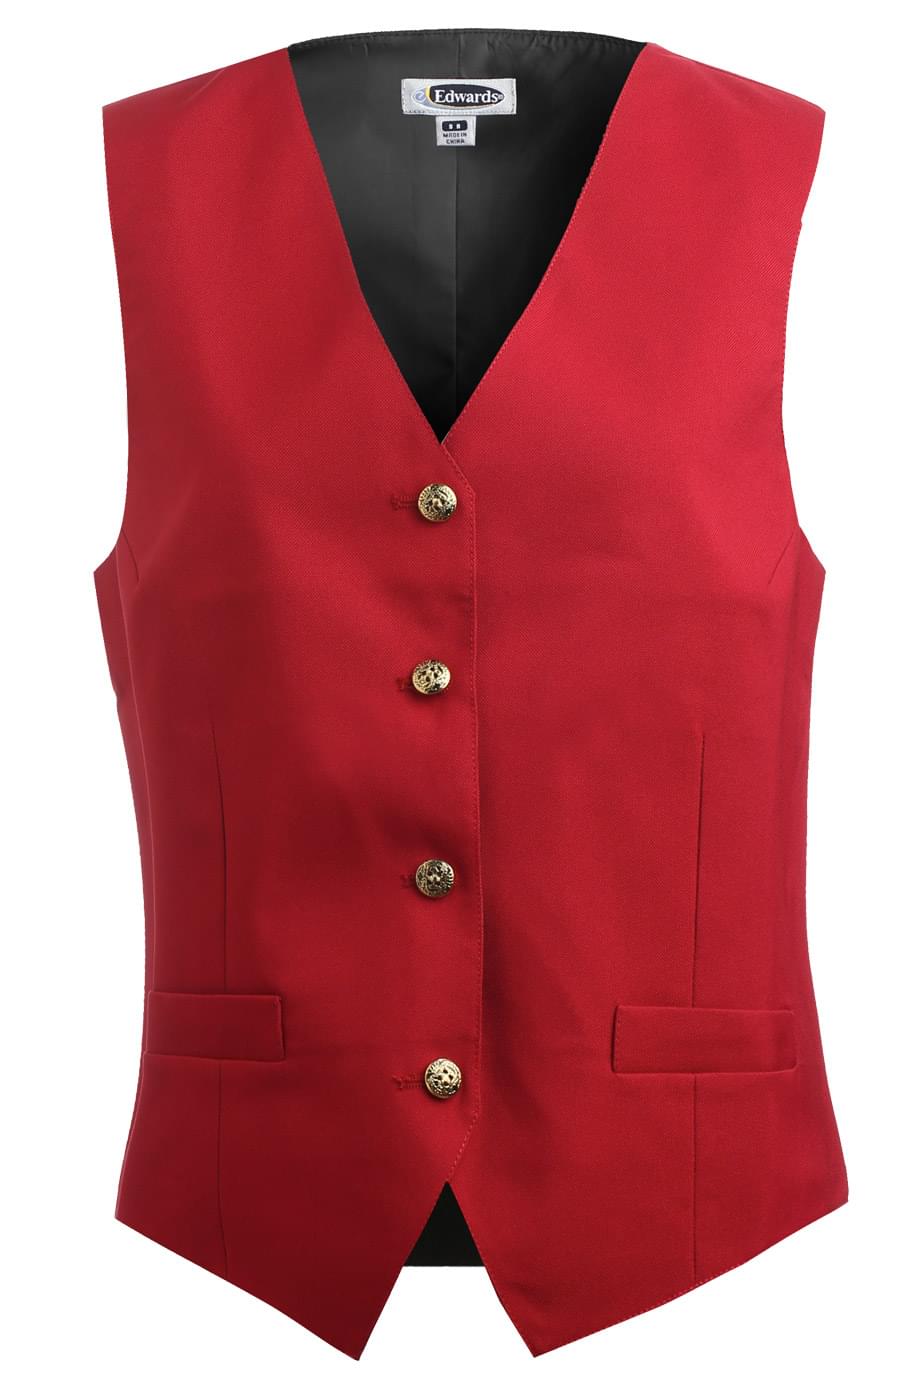 Edwards XS Ladies' Red Essential Polyester Vest (4 Buttons)